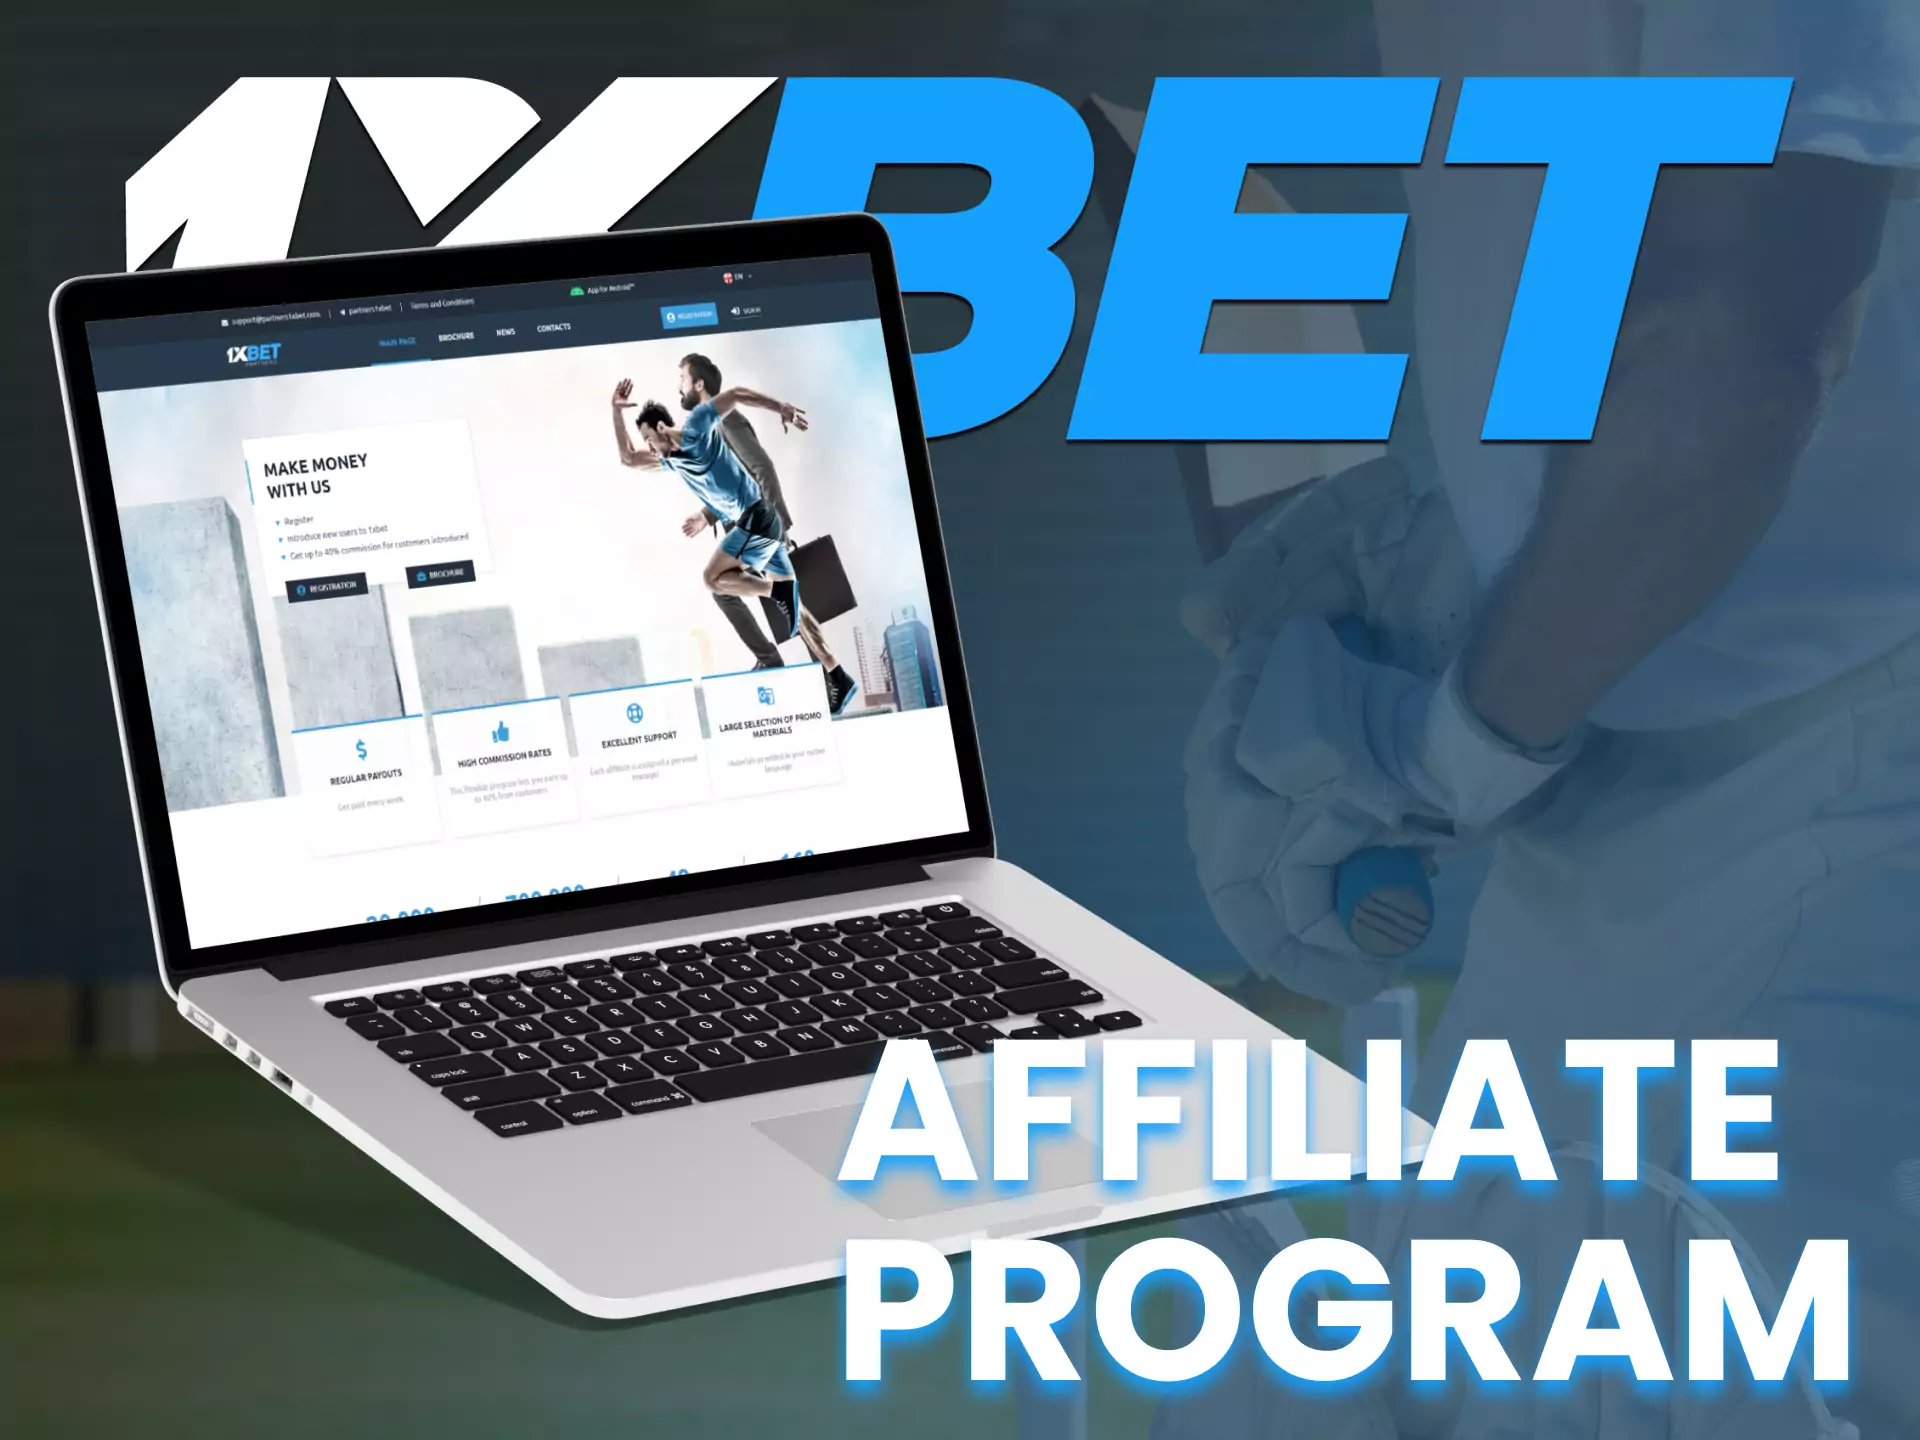 Try the 1xbet affiliate program and get additional profit from inviting new users.